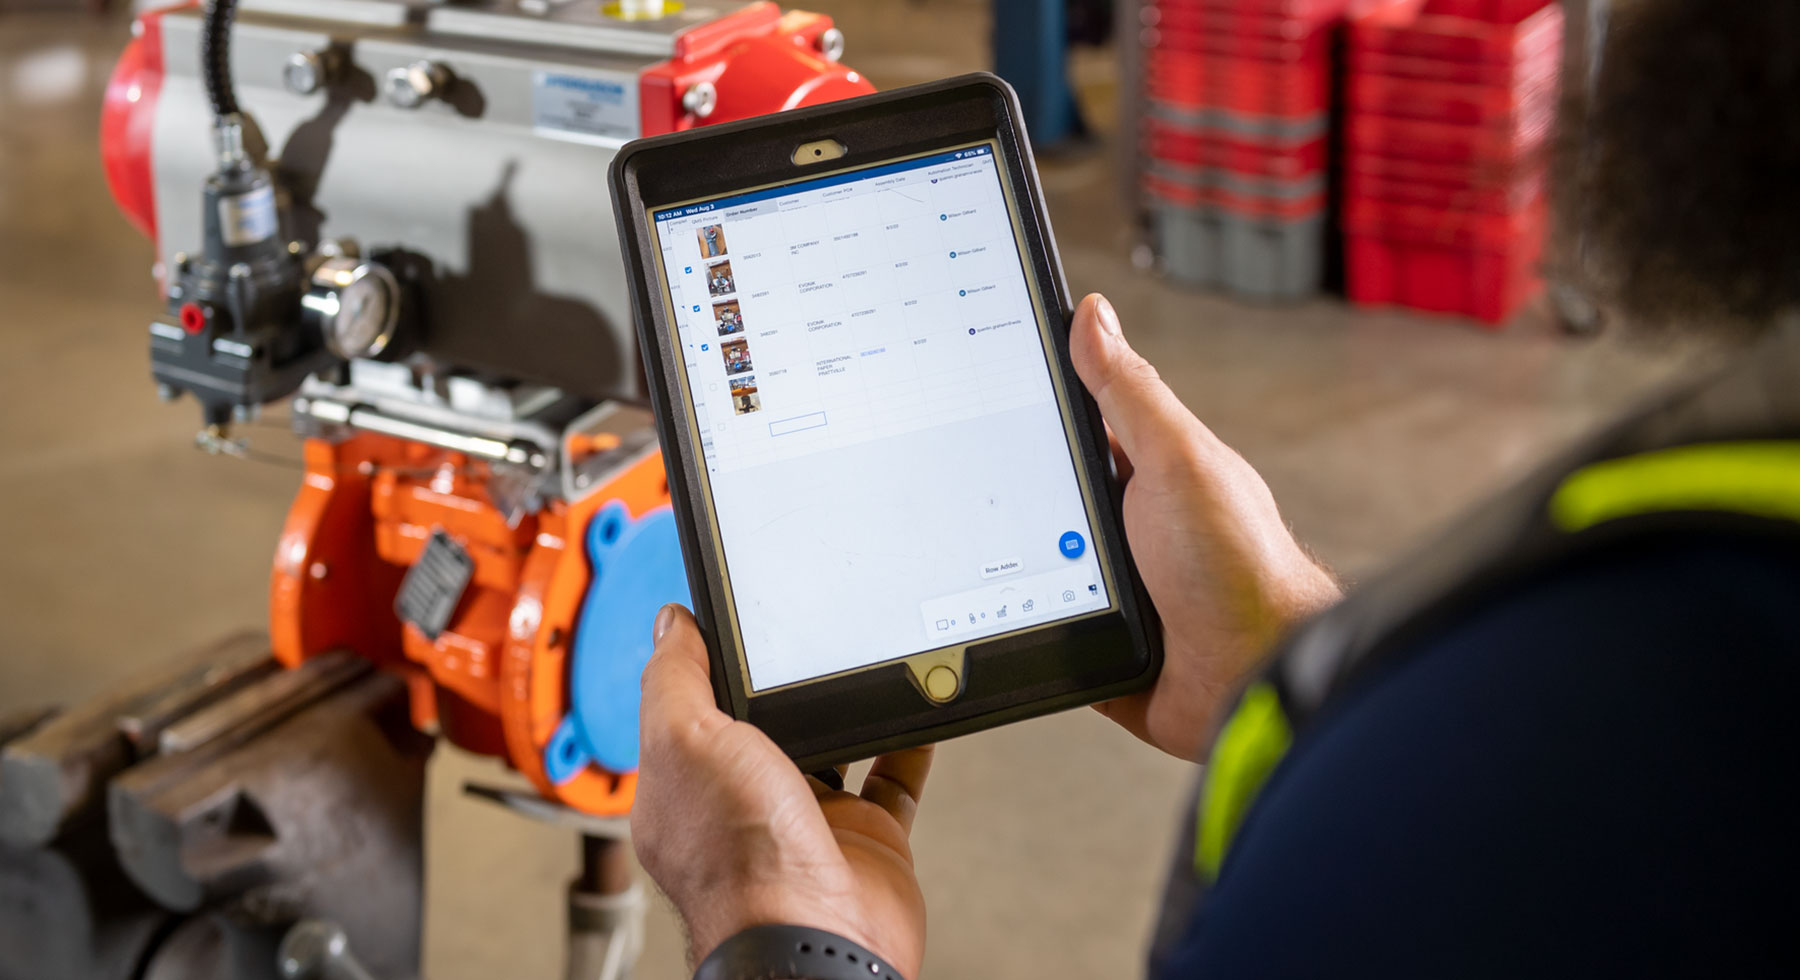 Valve automation and flow control quality assurance data on a tablet in a Ferguson facility.